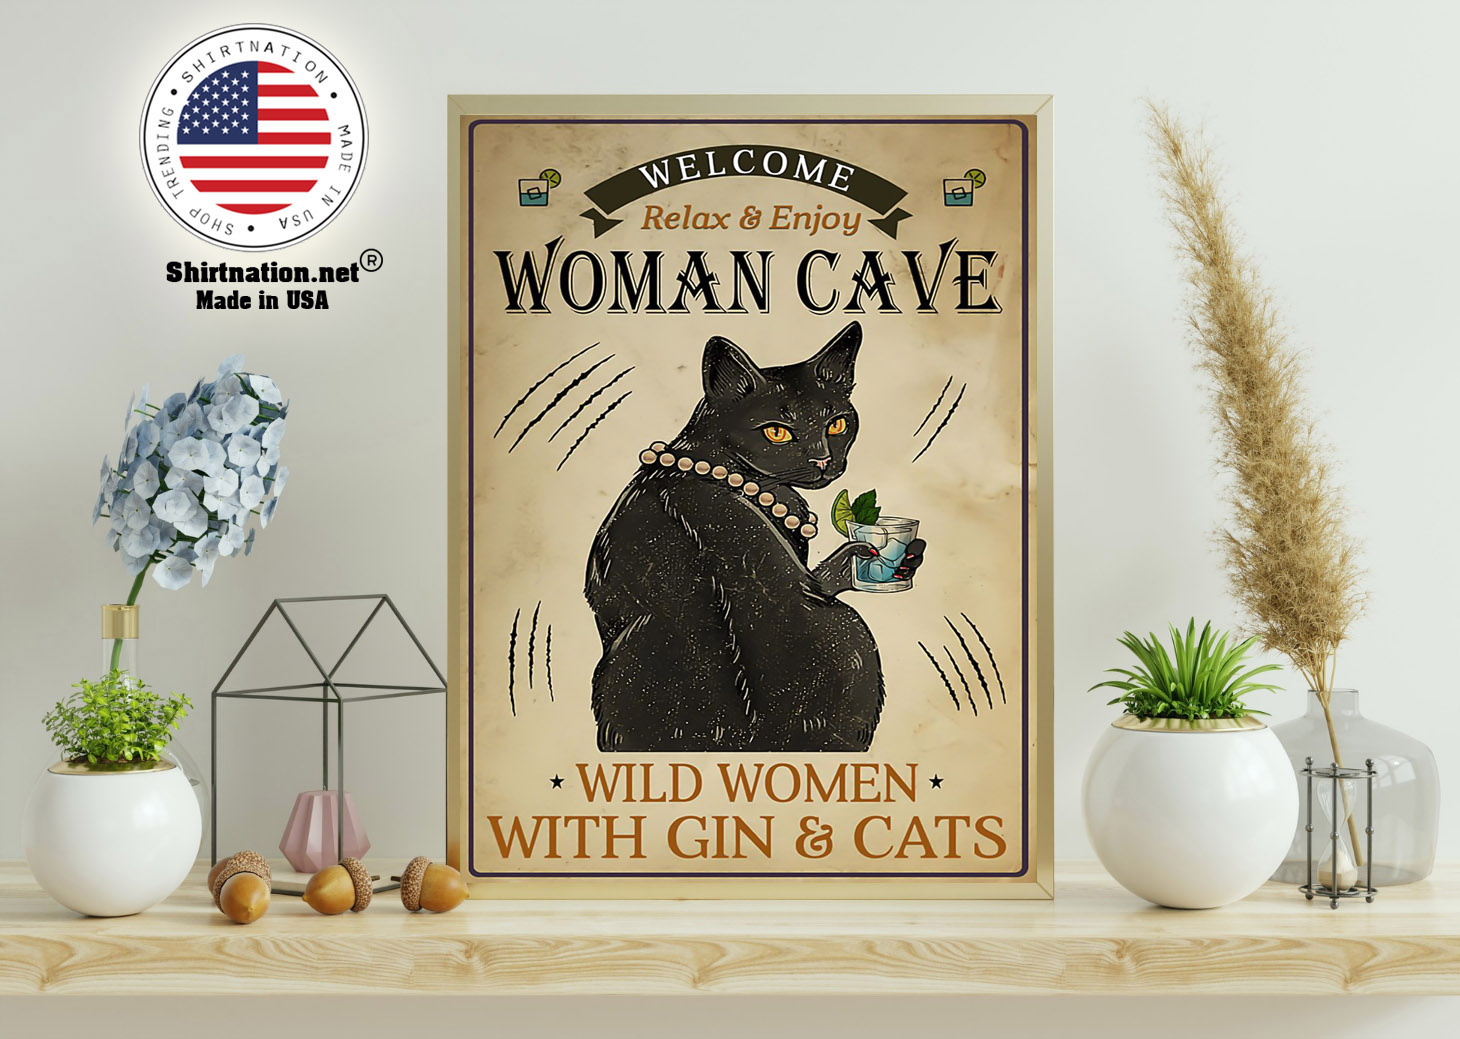 Welcome relax enjoy woman cave will women with gin and cats poster 11